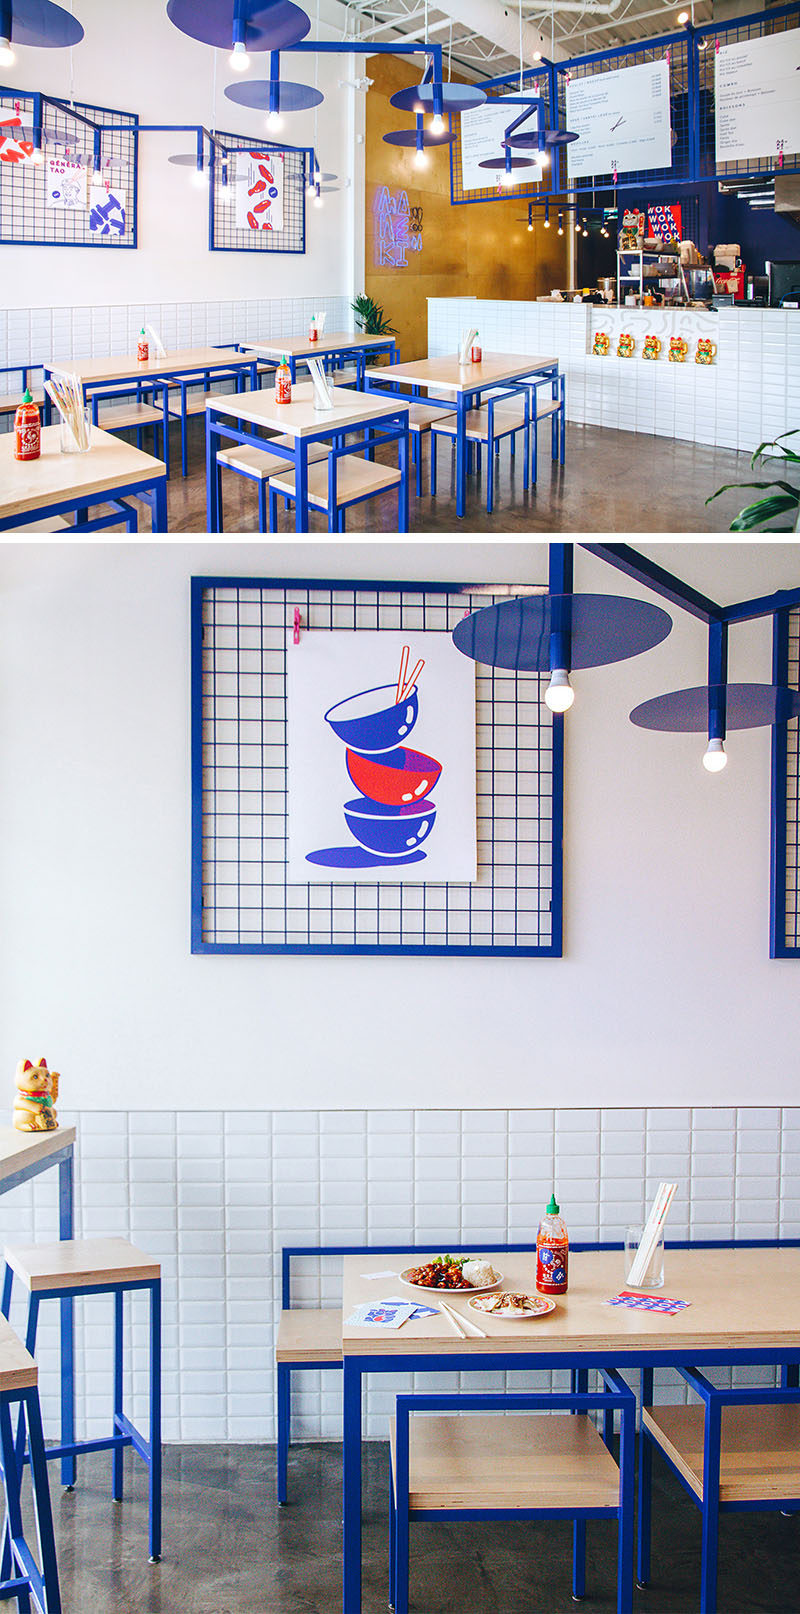 Rainville-Sangaré has collaborated with Studio Beau to design the recently launched 'Maneki Comptoir Asiat,’ a new Asian restaurant in Montreal, Canada. The designers aimed to create a space that was fun and inviting, while playing with Asian culture and stereotypes.